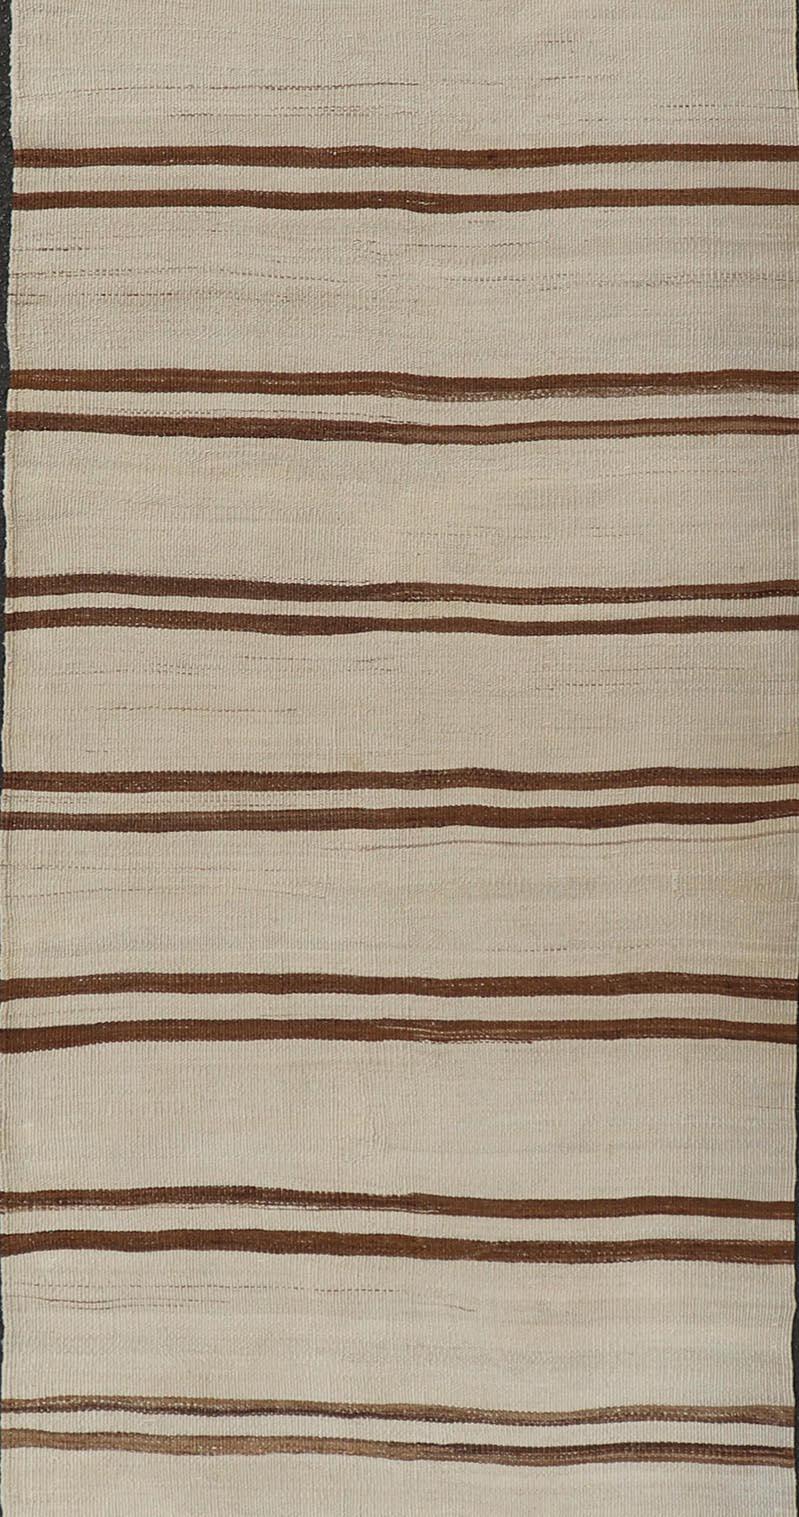 Minimalist Design Vintage Kilim Runner with Stripes in Brown and Ivory In Good Condition For Sale In Atlanta, GA